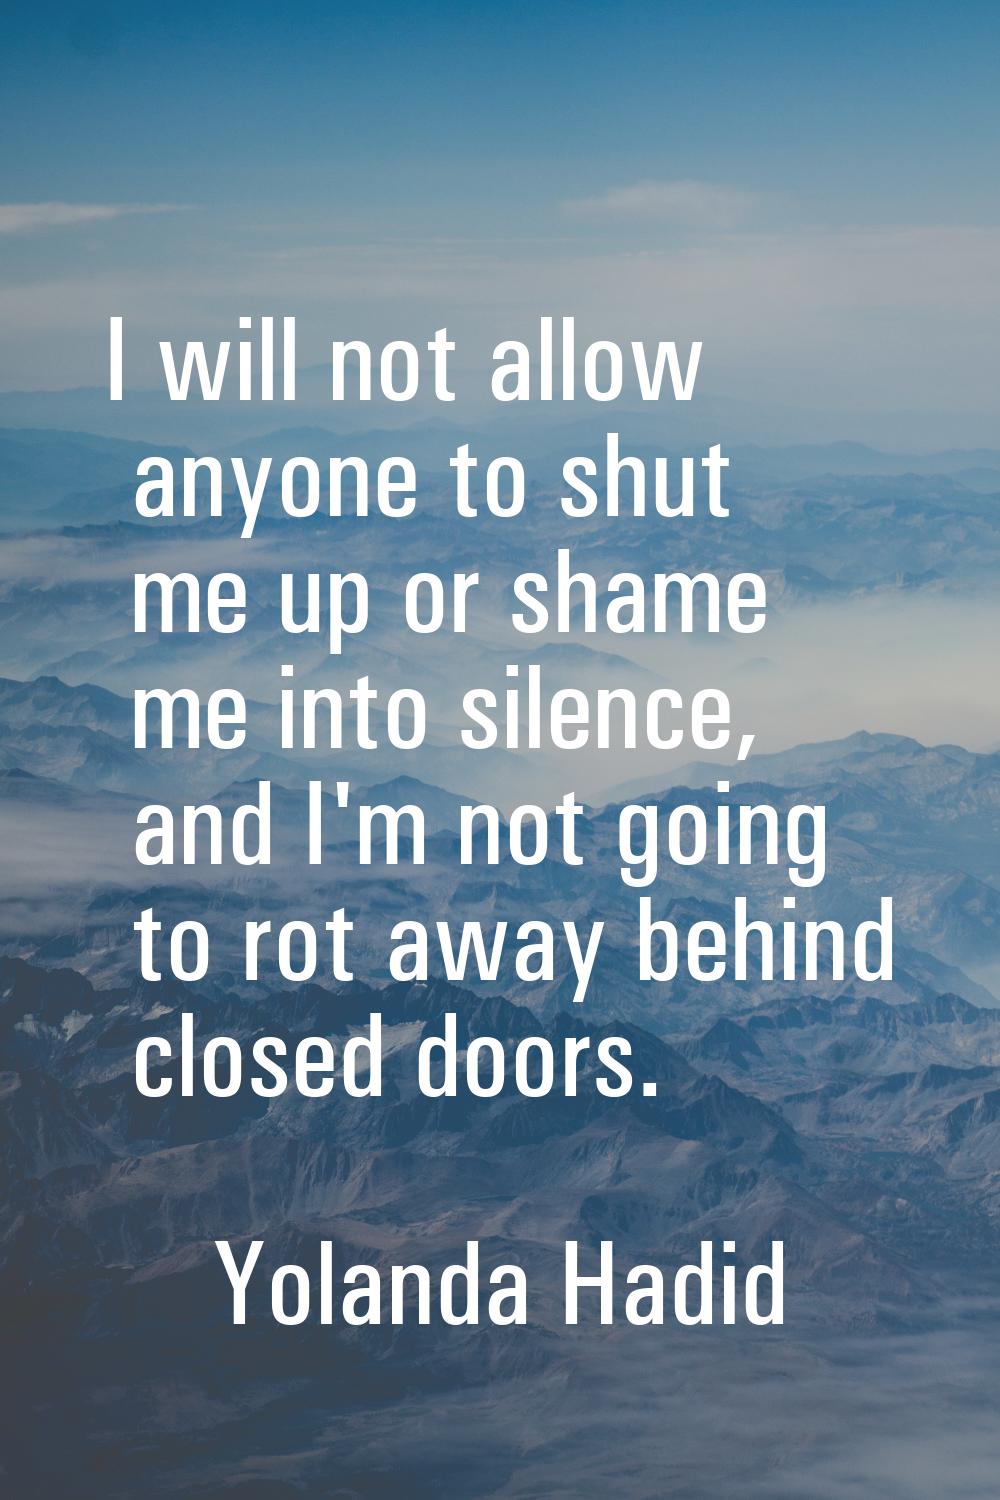 I will not allow anyone to shut me up or shame me into silence, and I'm not going to rot away behin